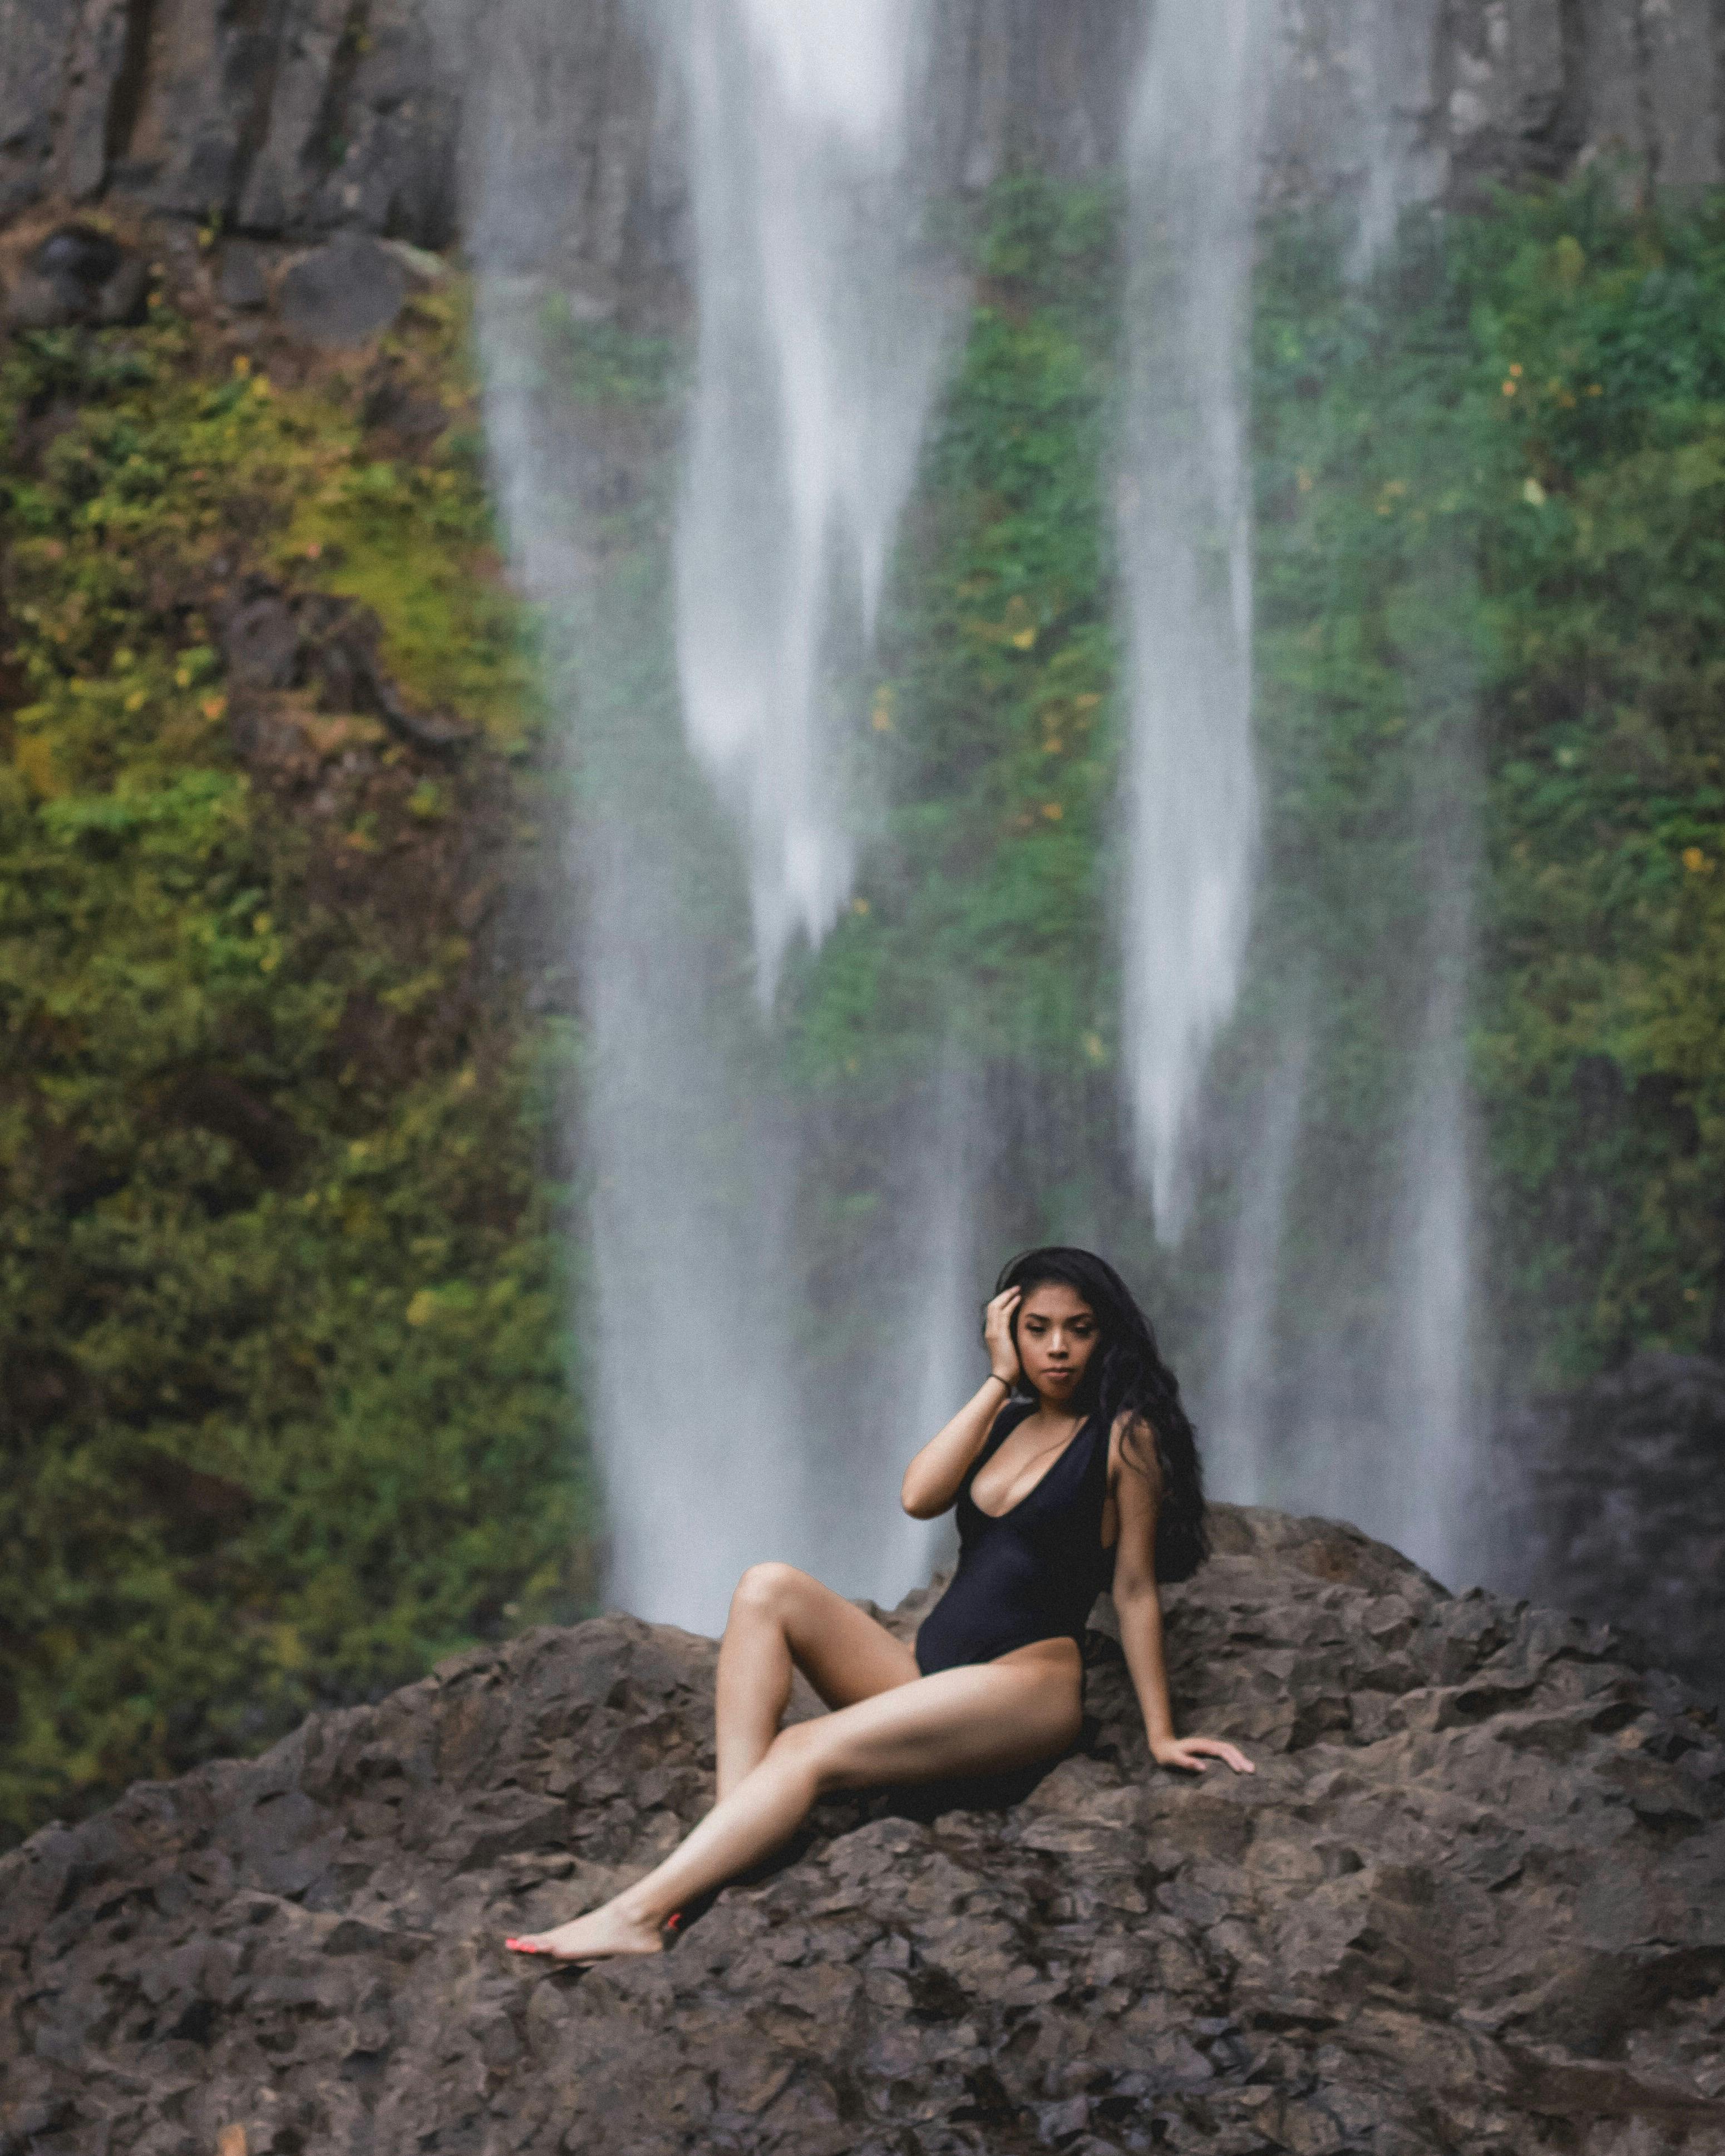 Photo of Woman in Black Swimsuit Posing on Rock with Waterfall in the Background · Free Stock Photo